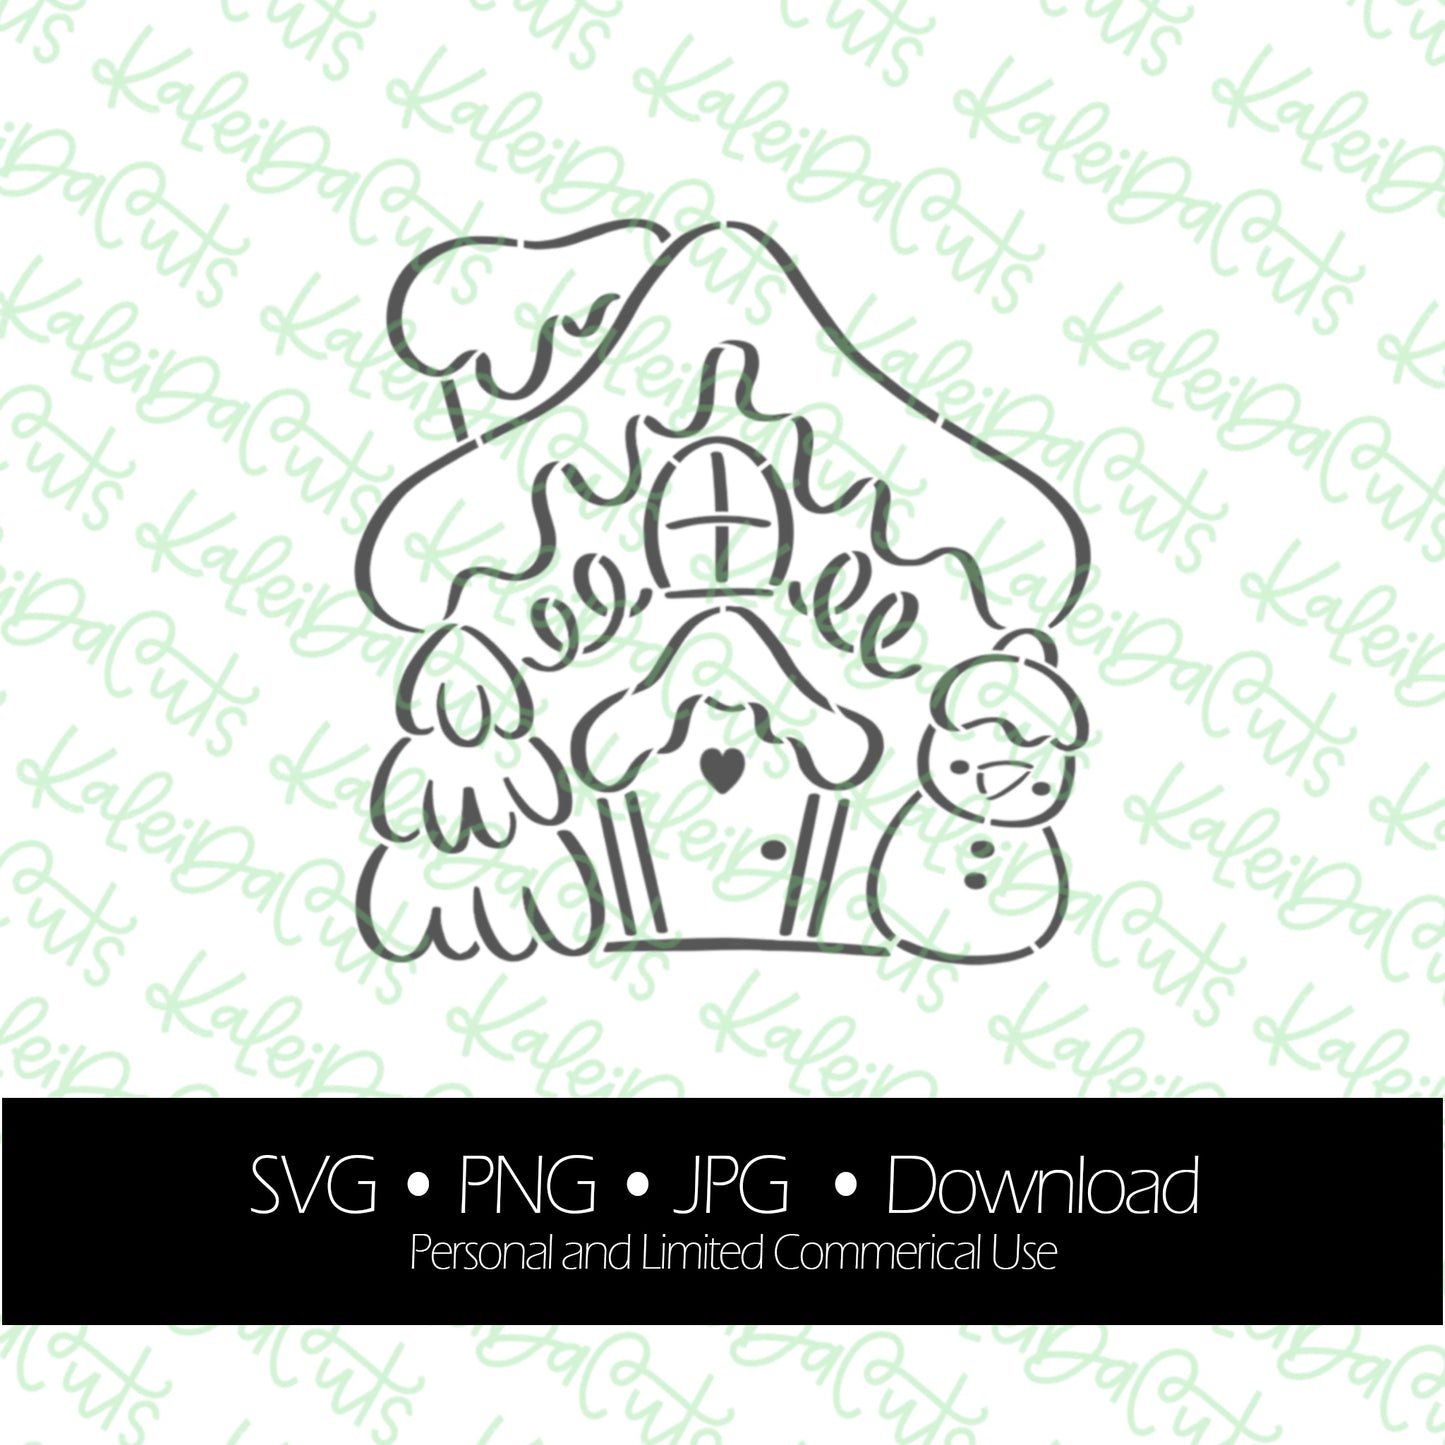 PYO Sweet Gingy House Digital Download.